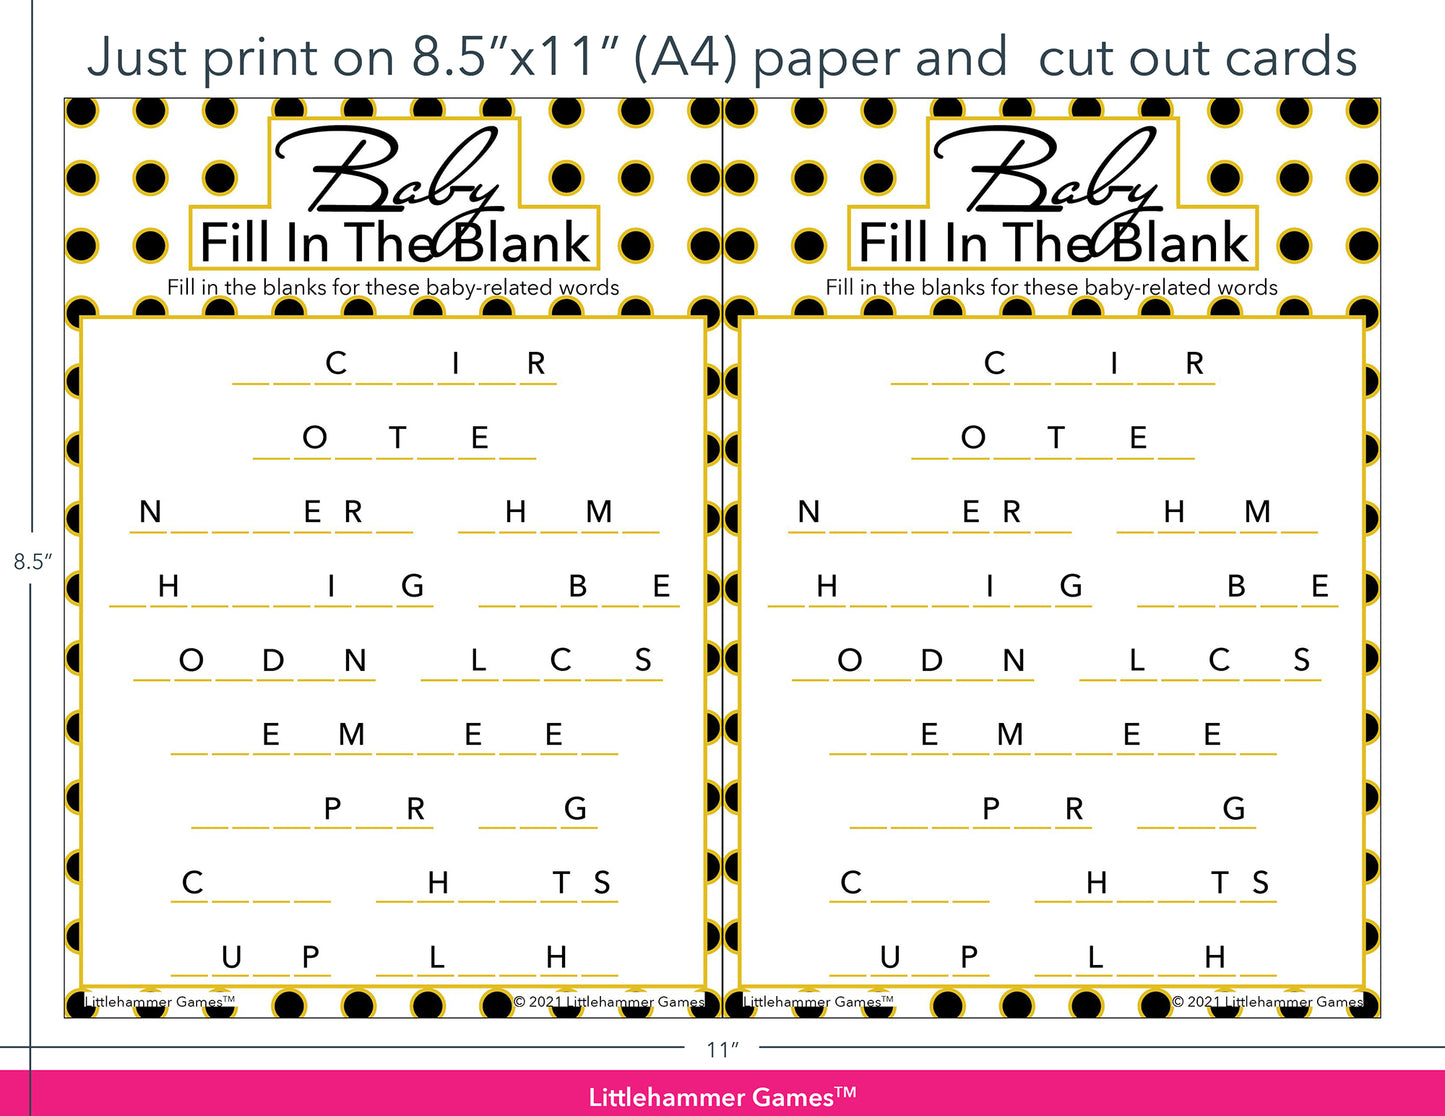 Baby Fill in the Blank black and gold polka dot game cards with printing instructions